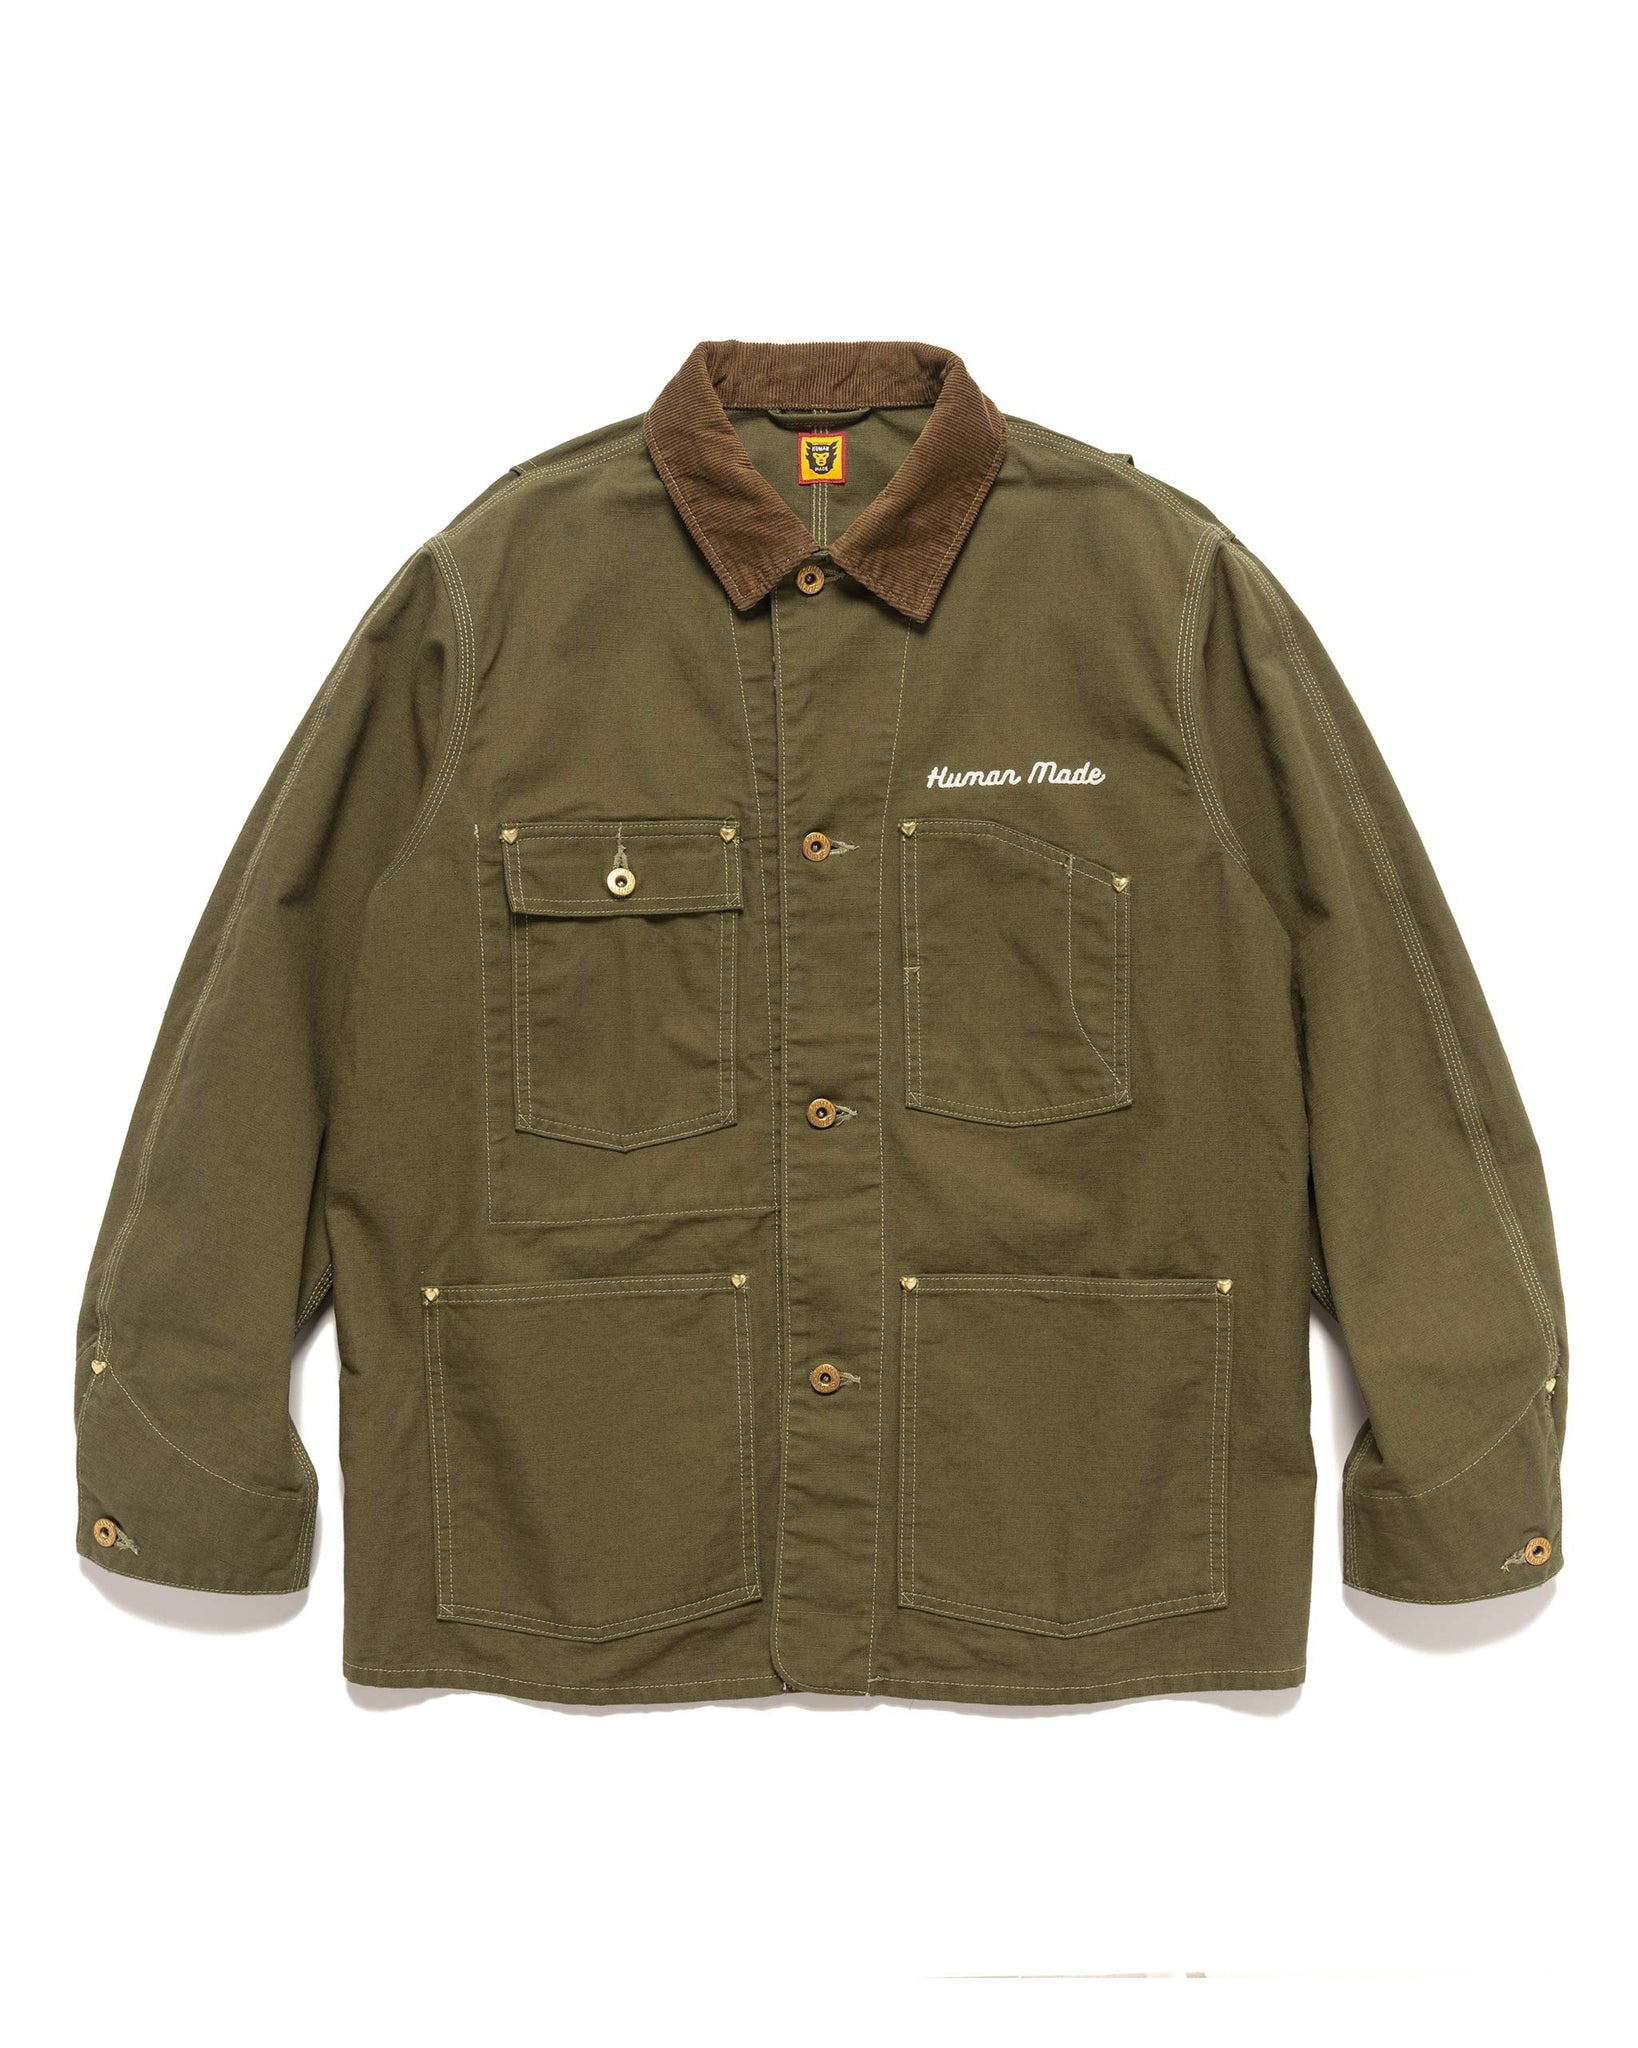 Human Made Duck Coverall Jacket Olive Drab | REVERSIBLE